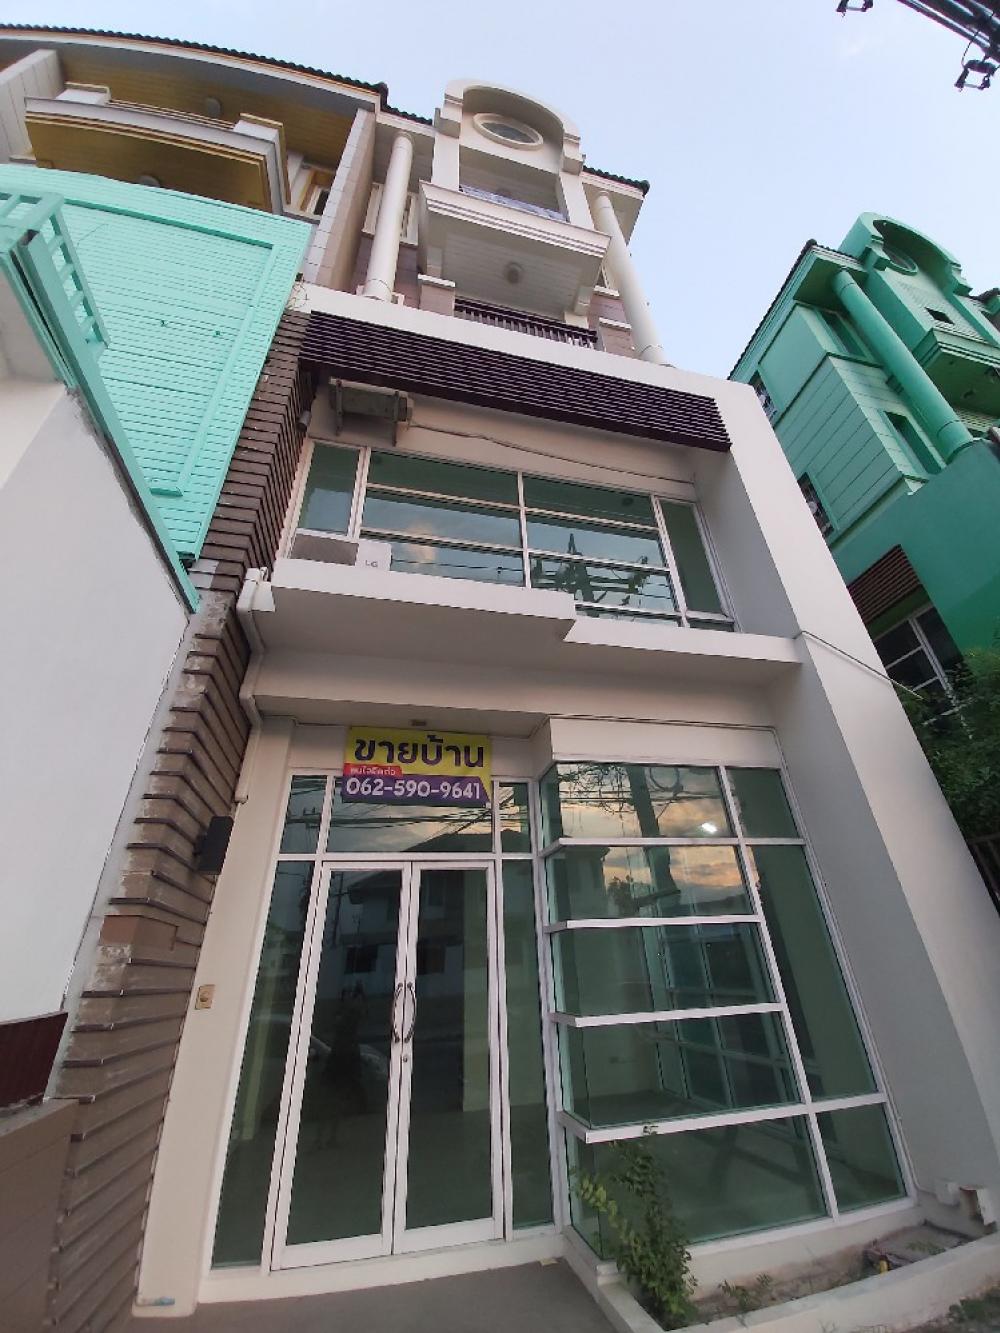 For SaleTownhouseKaset Nawamin,Ladplakao : Sell!!️ Home Office ⭐ Premium Place Village ⭐ (Kaset Nawamin-Maailap), very good location, next to the main road, doing business, opening a storefront, making an office